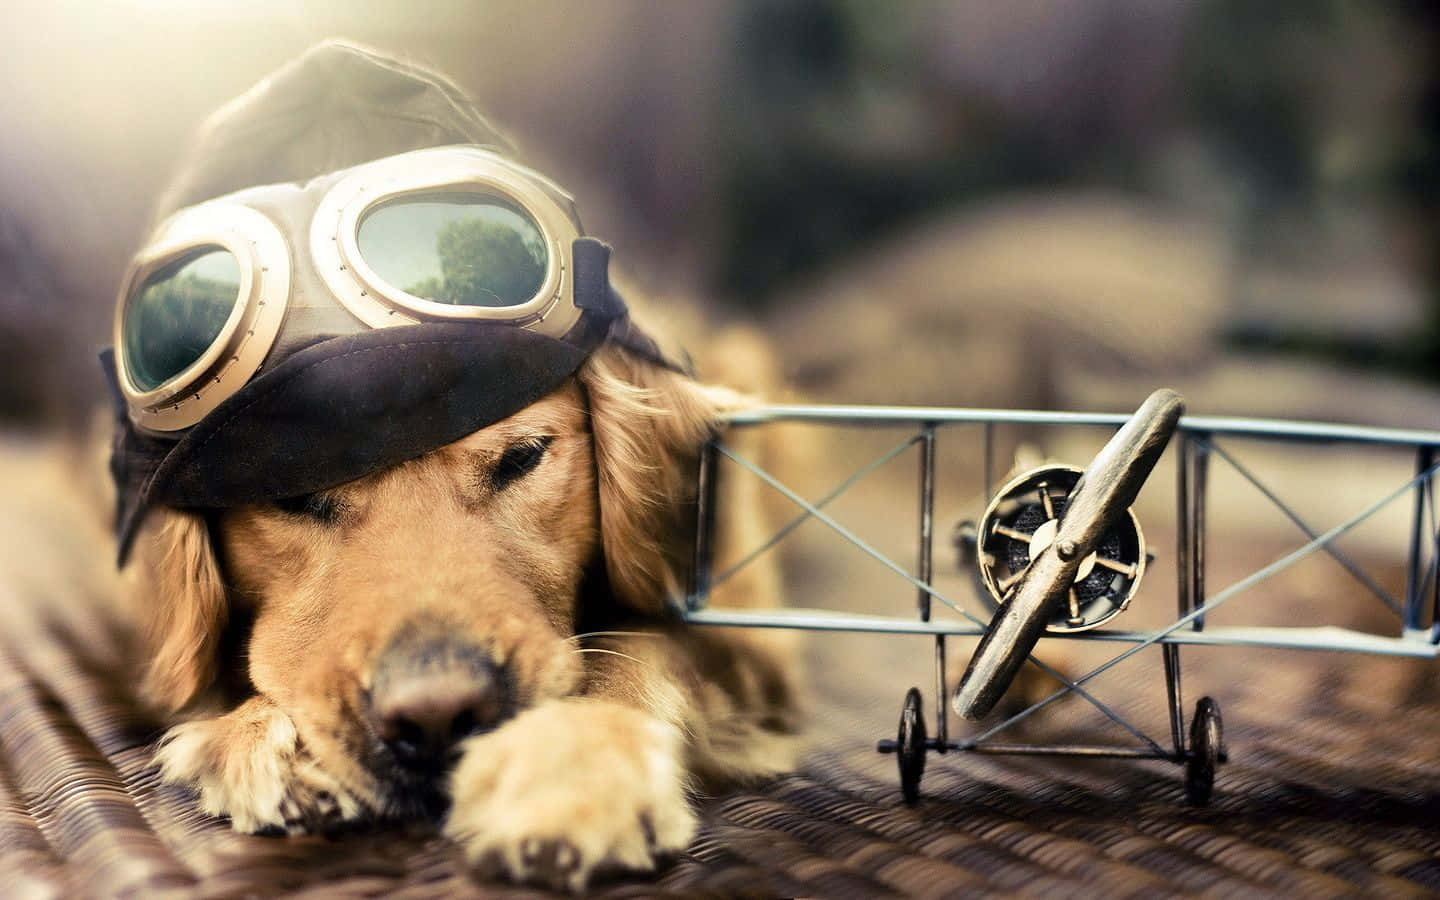 What A Cool Pup! Wallpaper